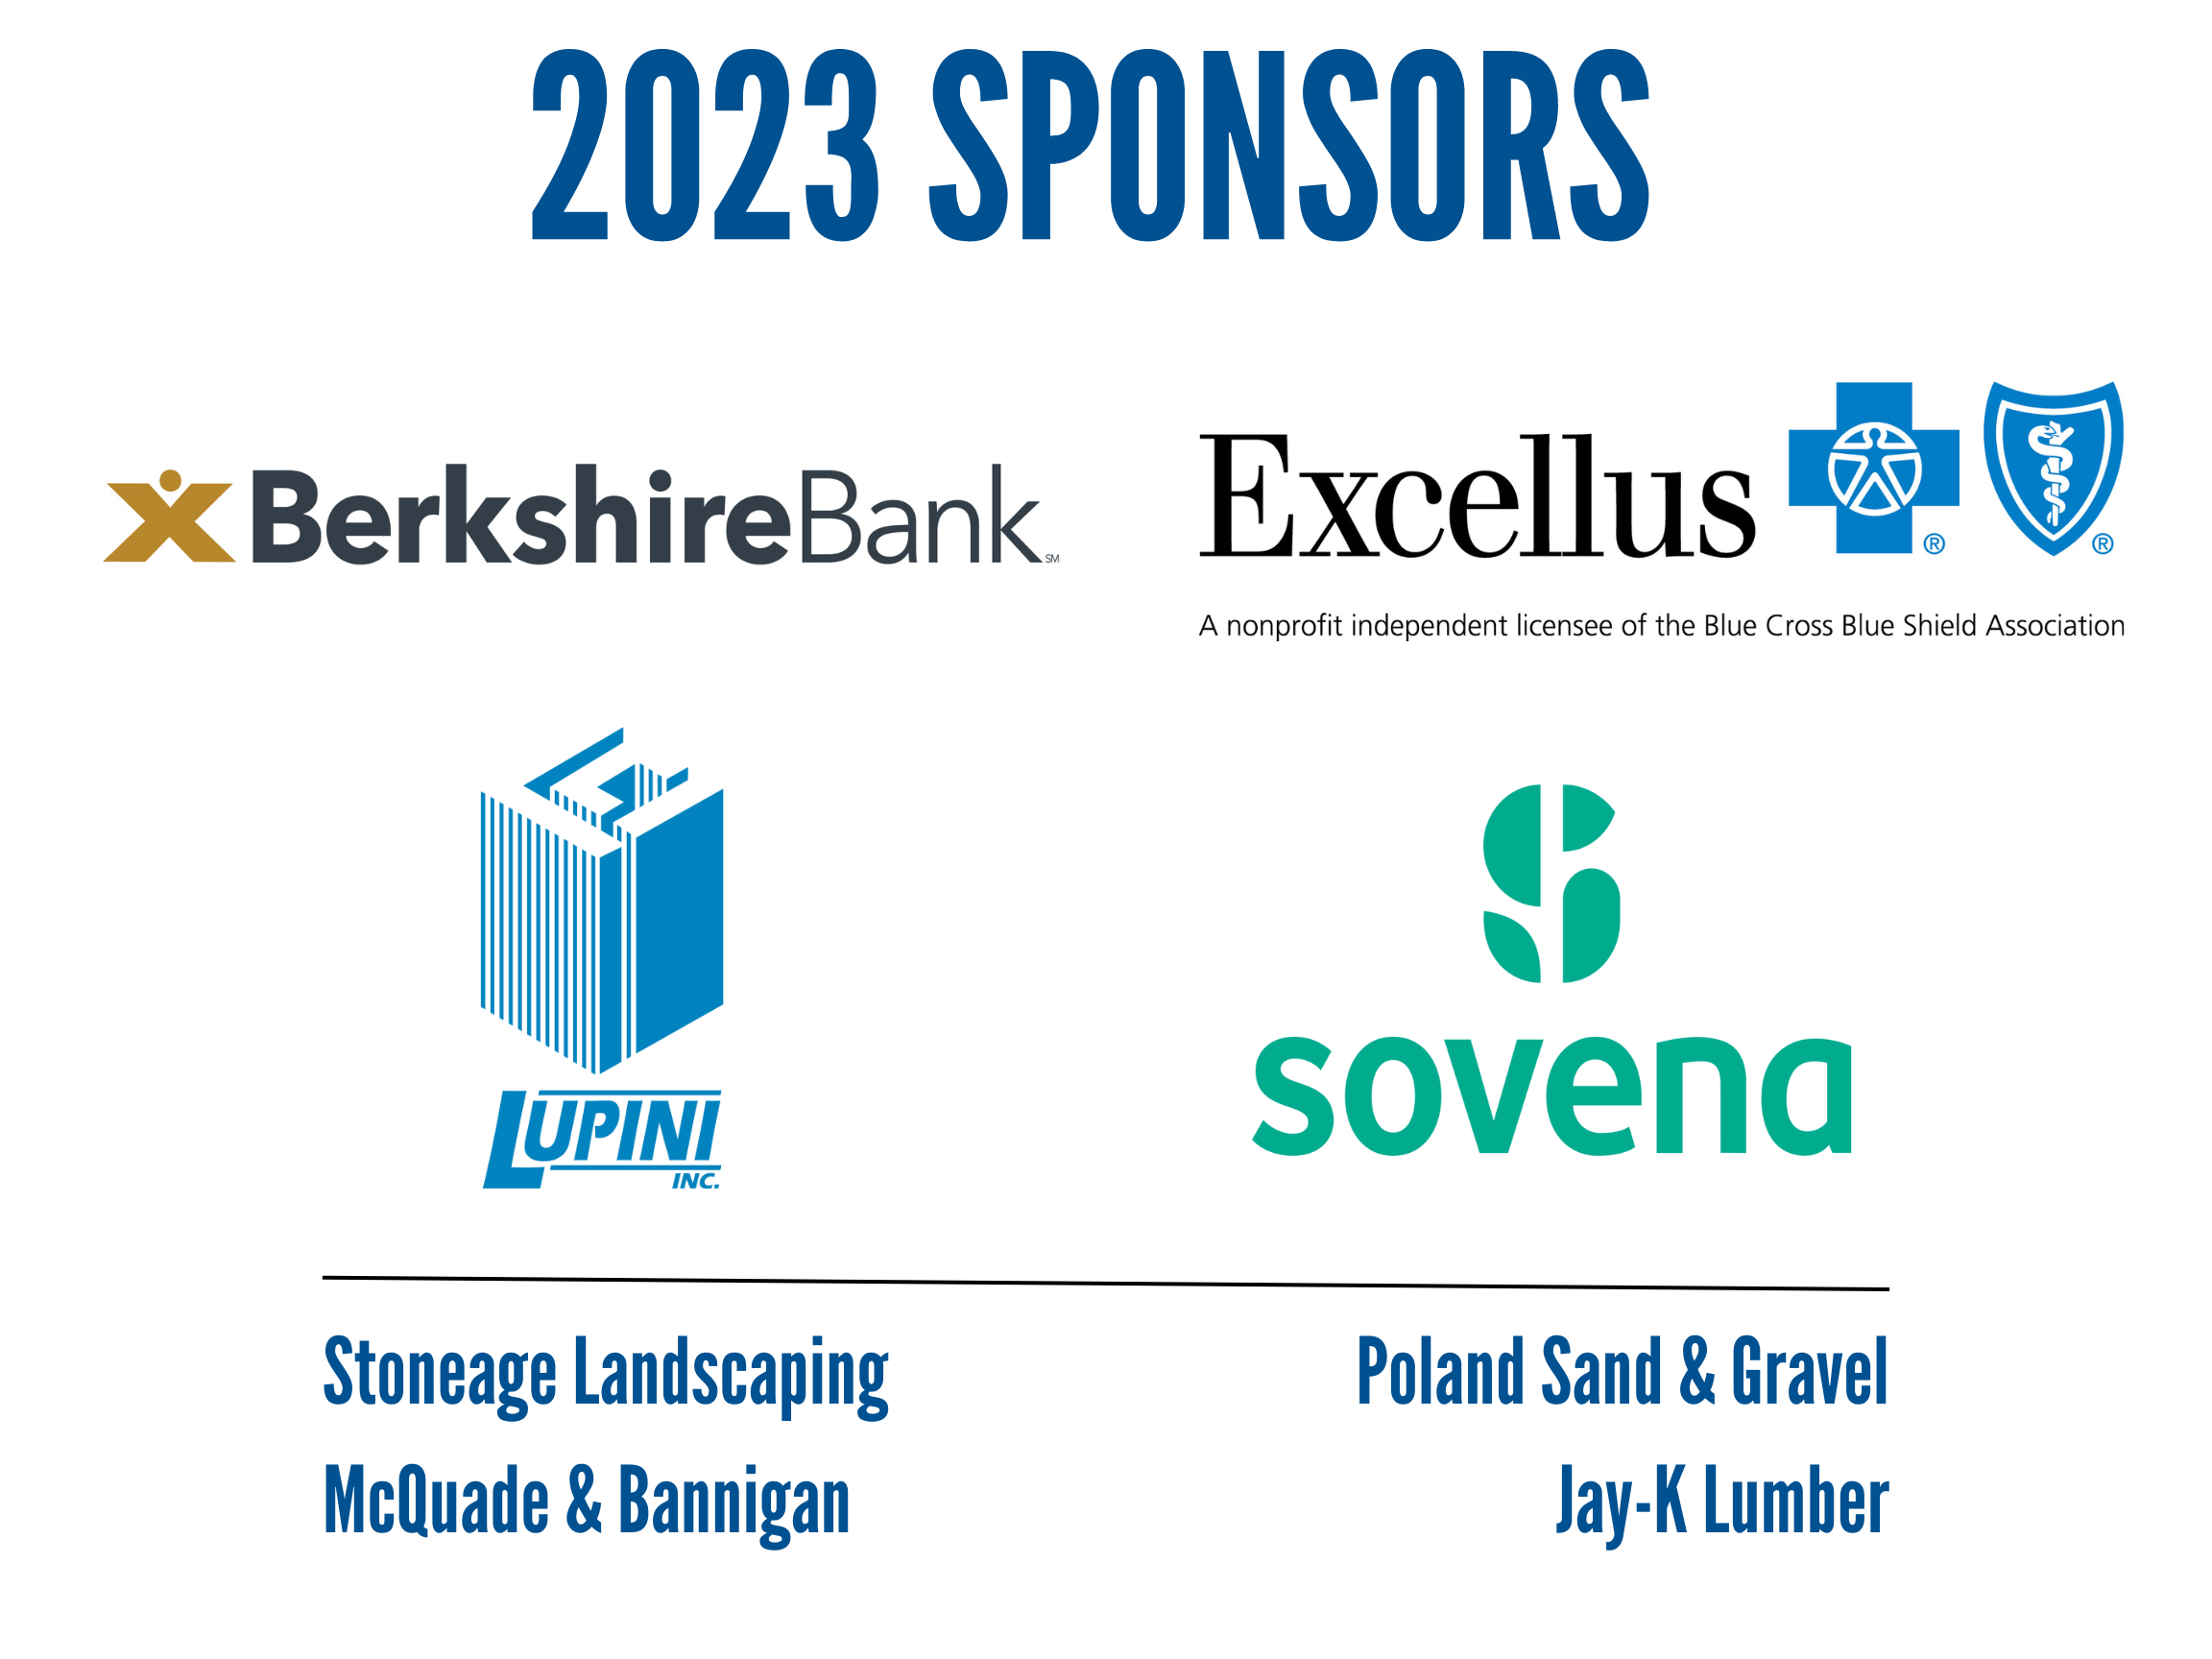 2023 Sponsors, Berkshire Bank, Excellus BlueCross BlueShield, Lupini Construction, Sovena, Stoneage Landscaping, McQuade and Bannigan, Poland Sand and Gravel, Jay-K Lumber